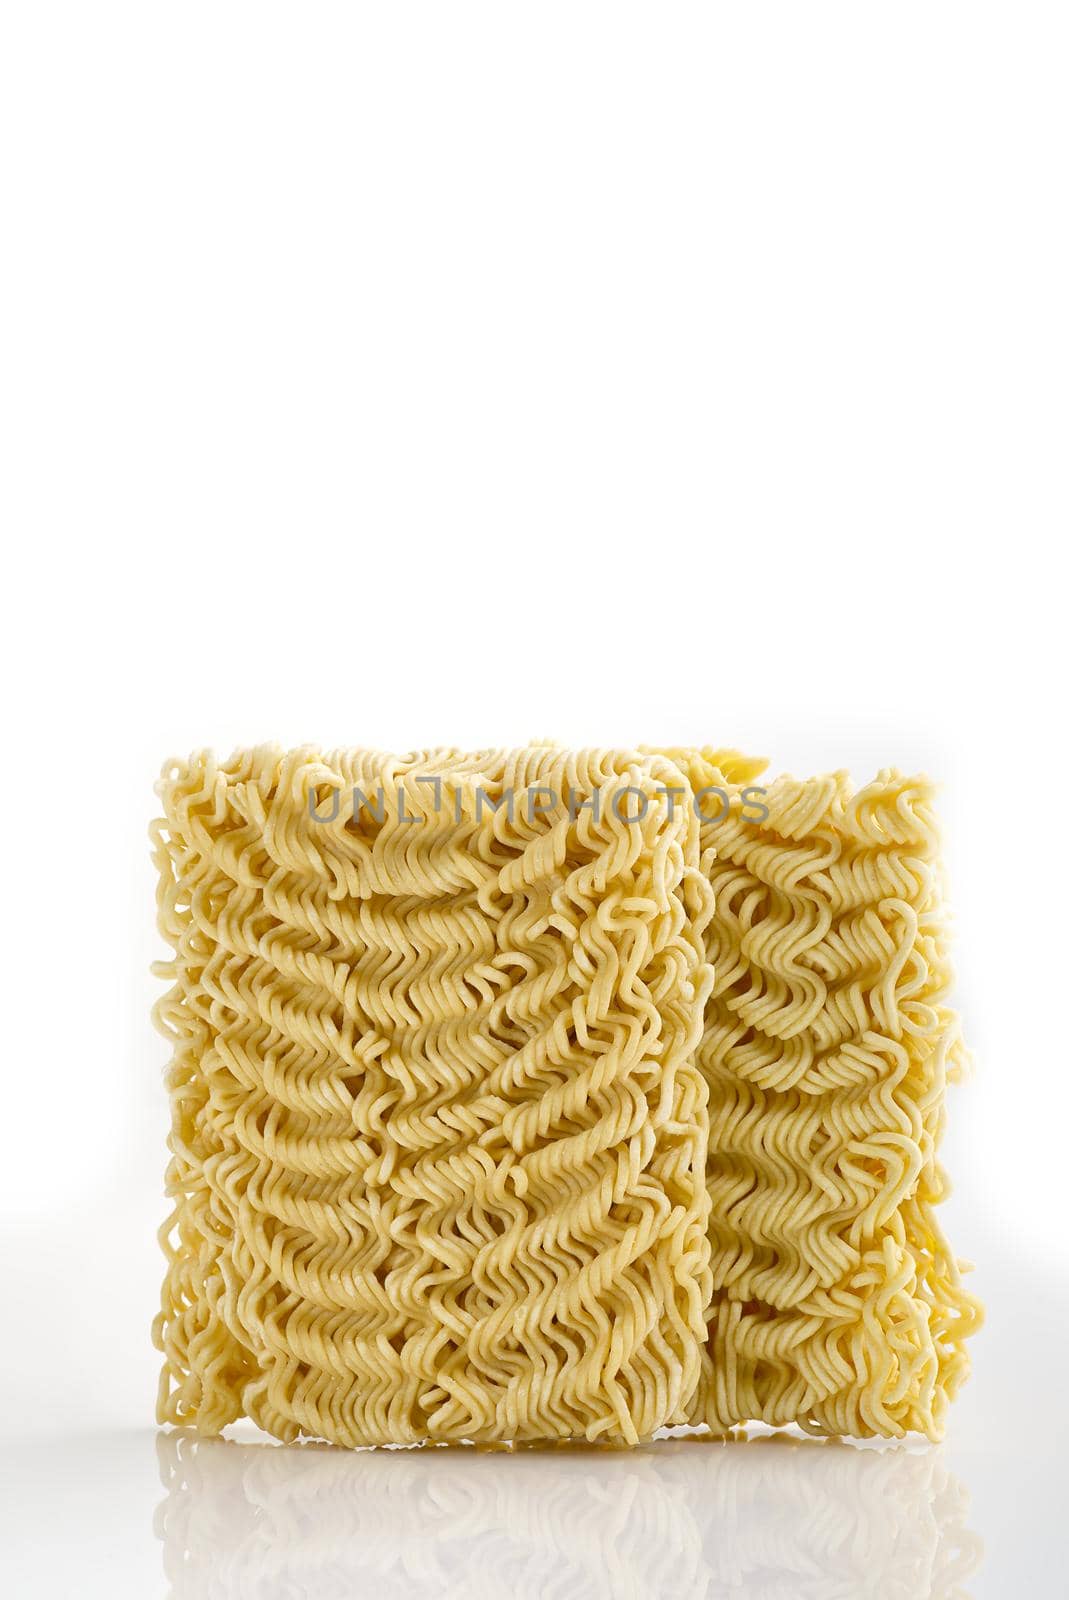 Raw Instant noodles. Close up instant noodles texture for background. by PhotoTime